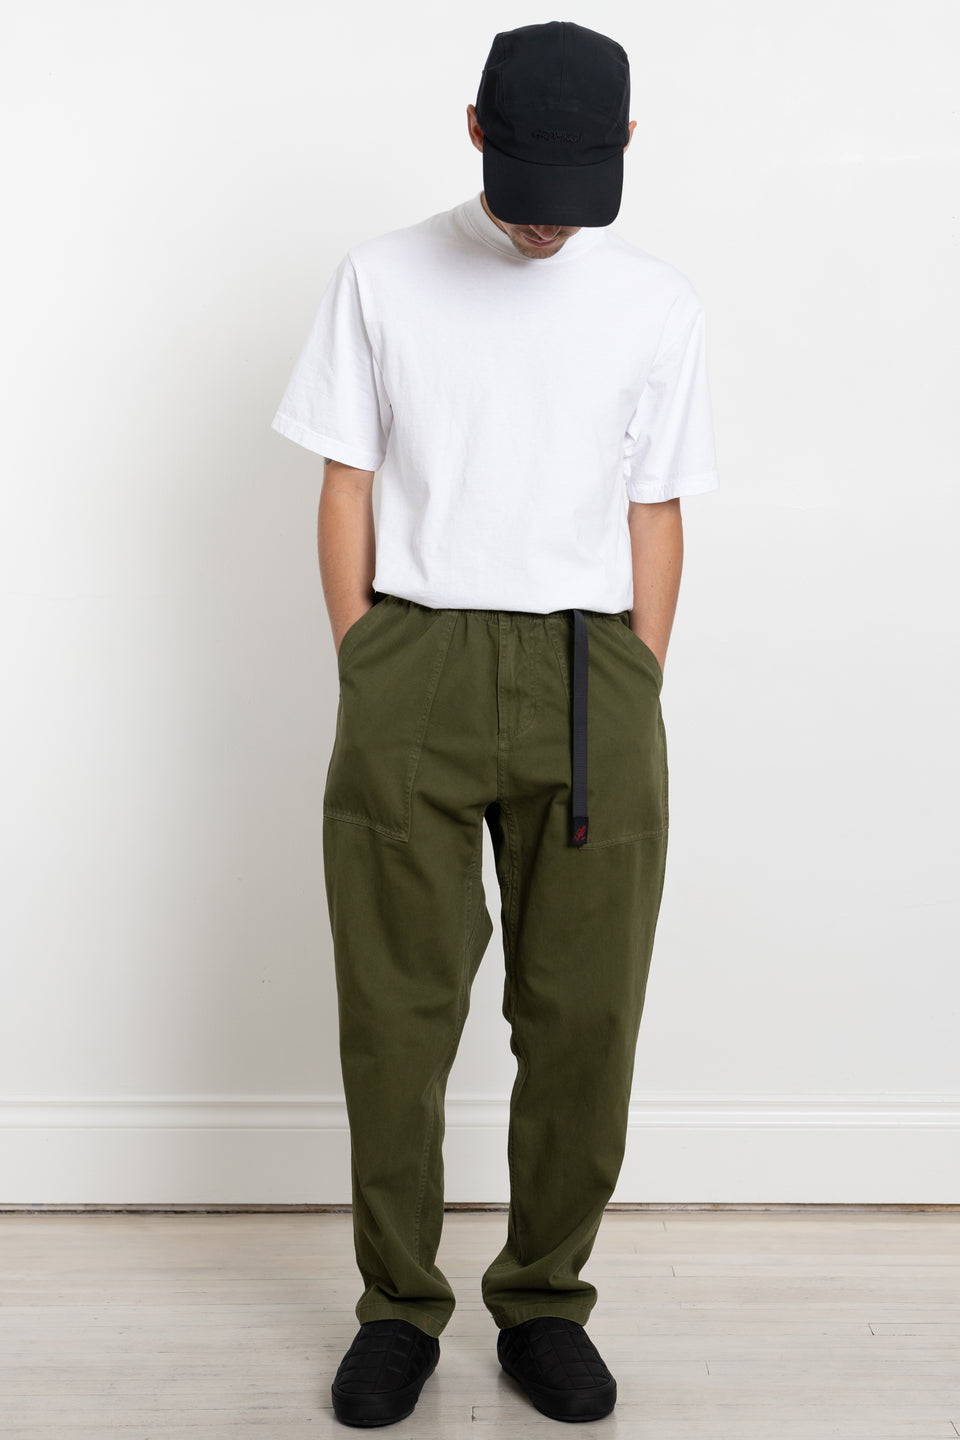 Gramicci Japan FW23 Men's Collection Loose Tapered Ridge Pant Olive Calculus Victoria BC Canada